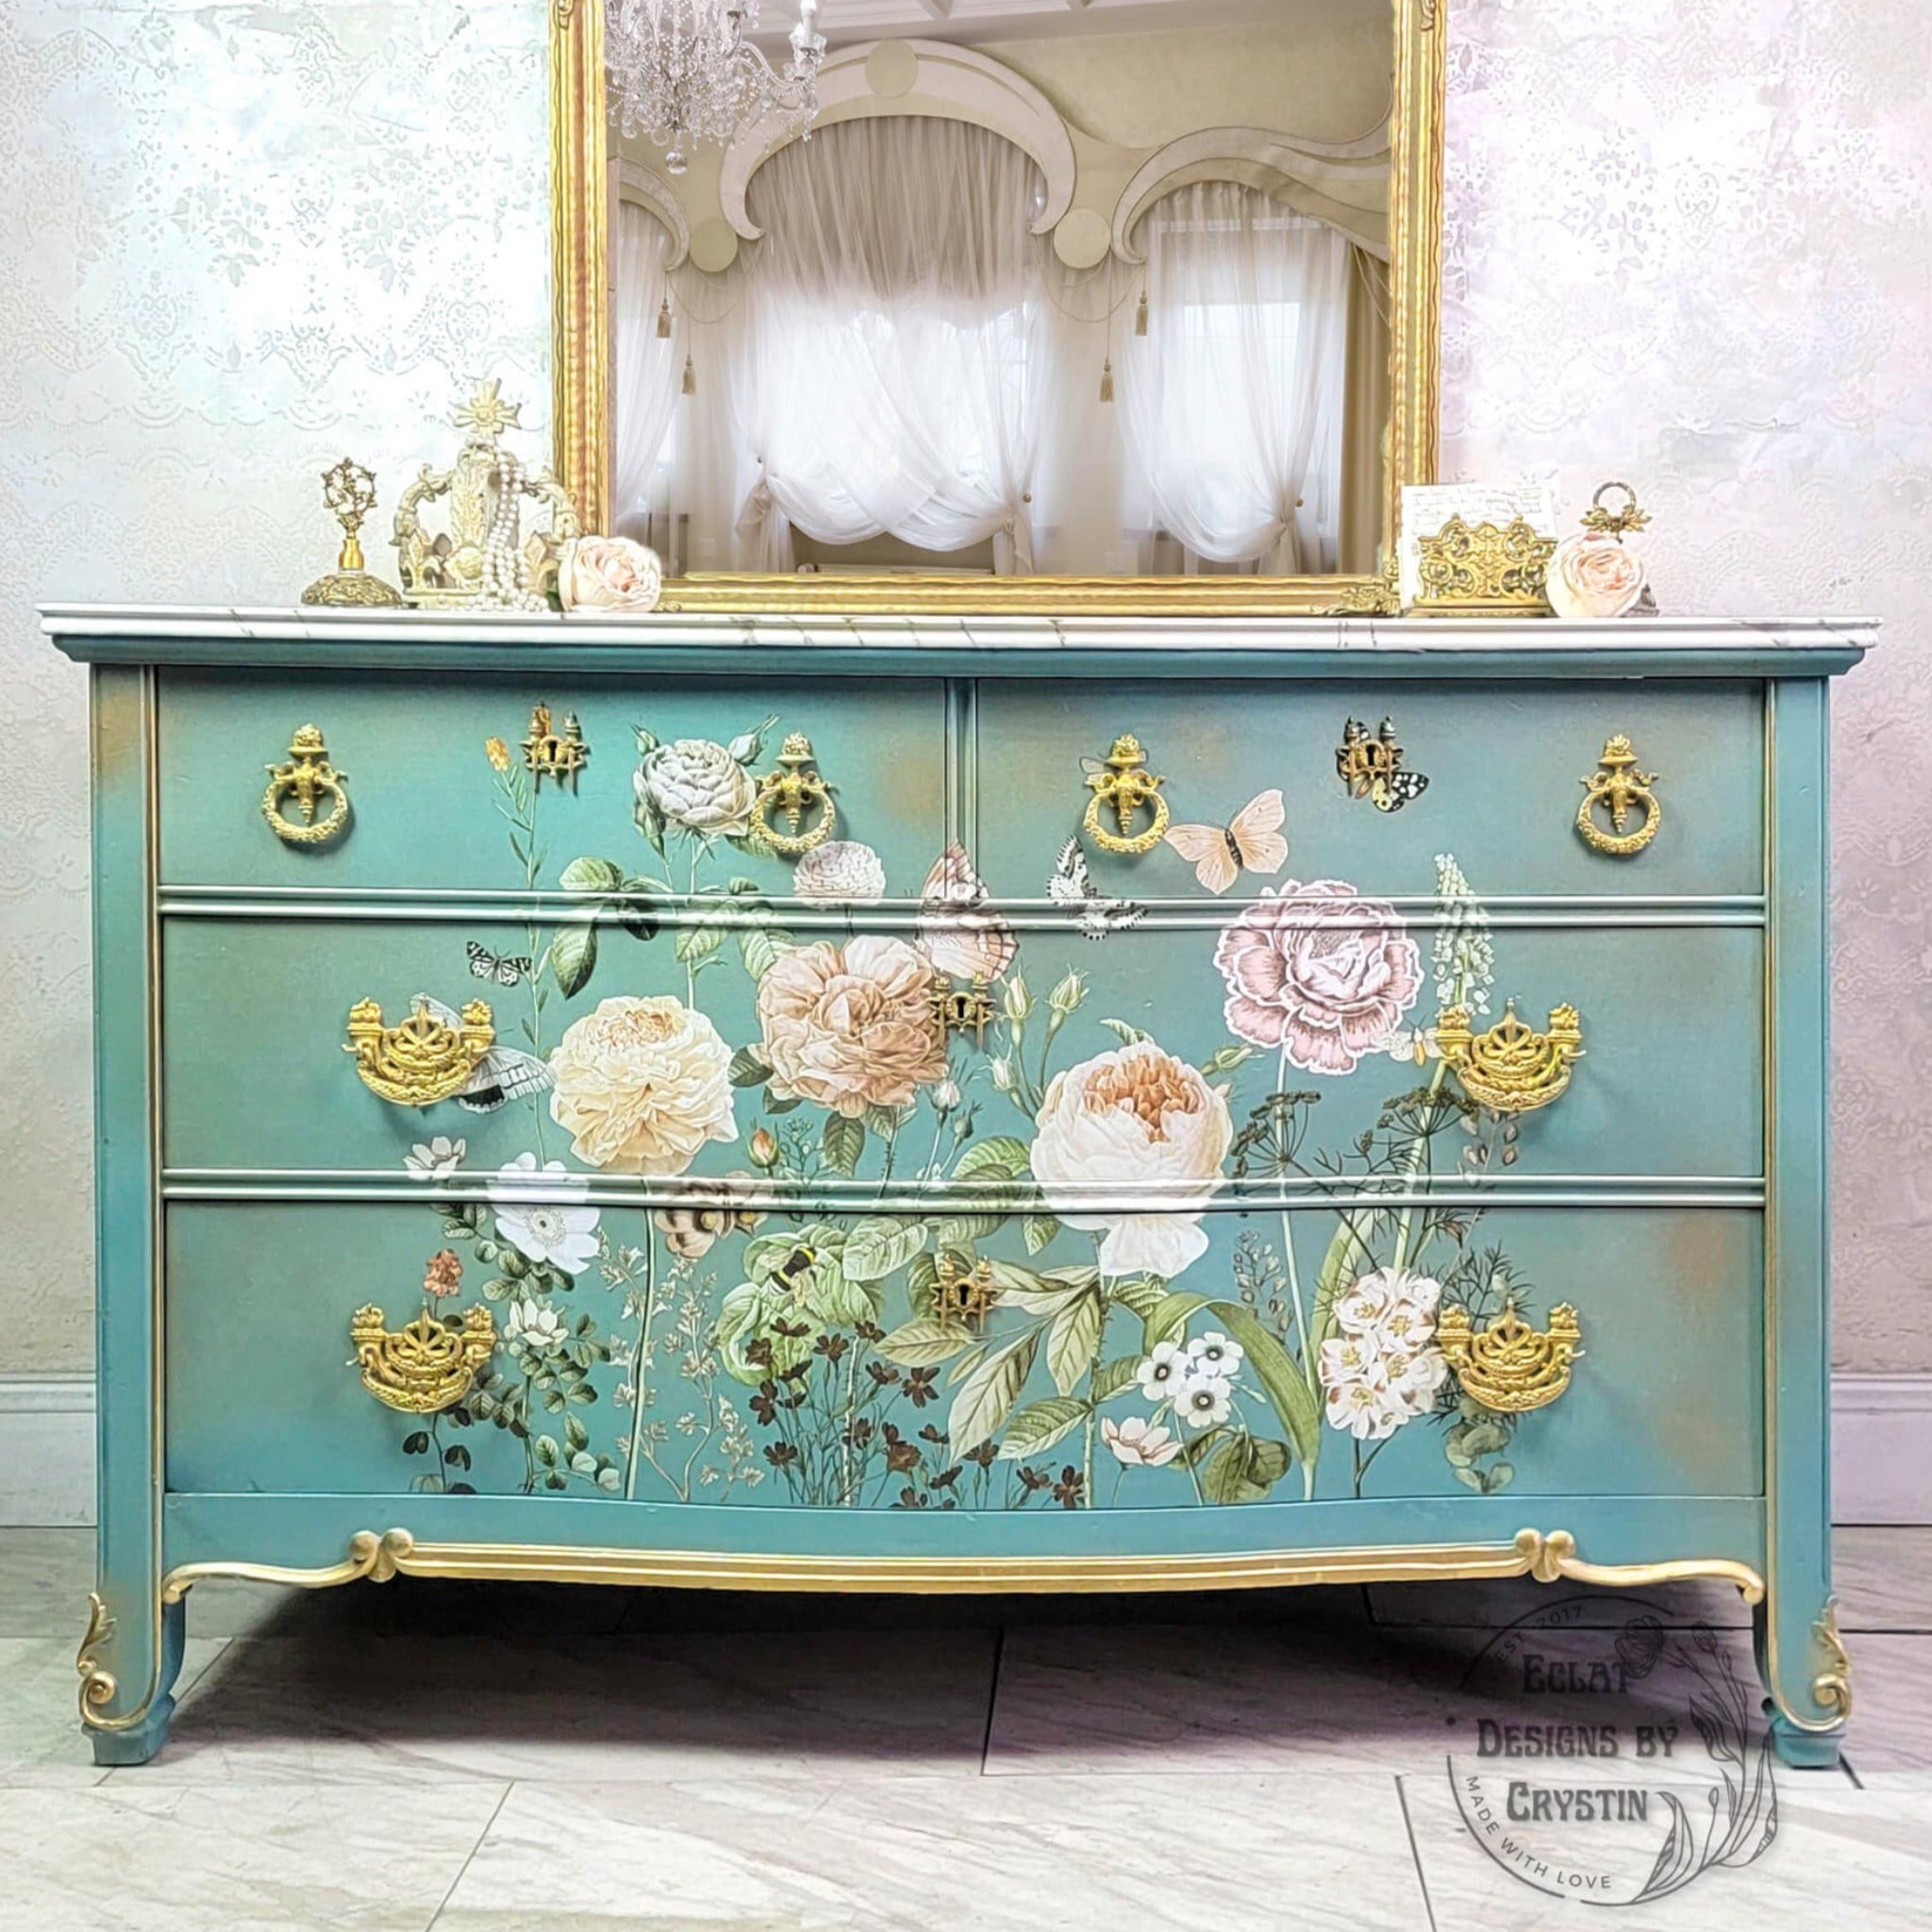 A vintage 4-drawer dresser refurbished by Eclat Designs by Crystin is painted light teal with gold accents and features ReDesign with Prima's All the Flowers transfer on its drawers.